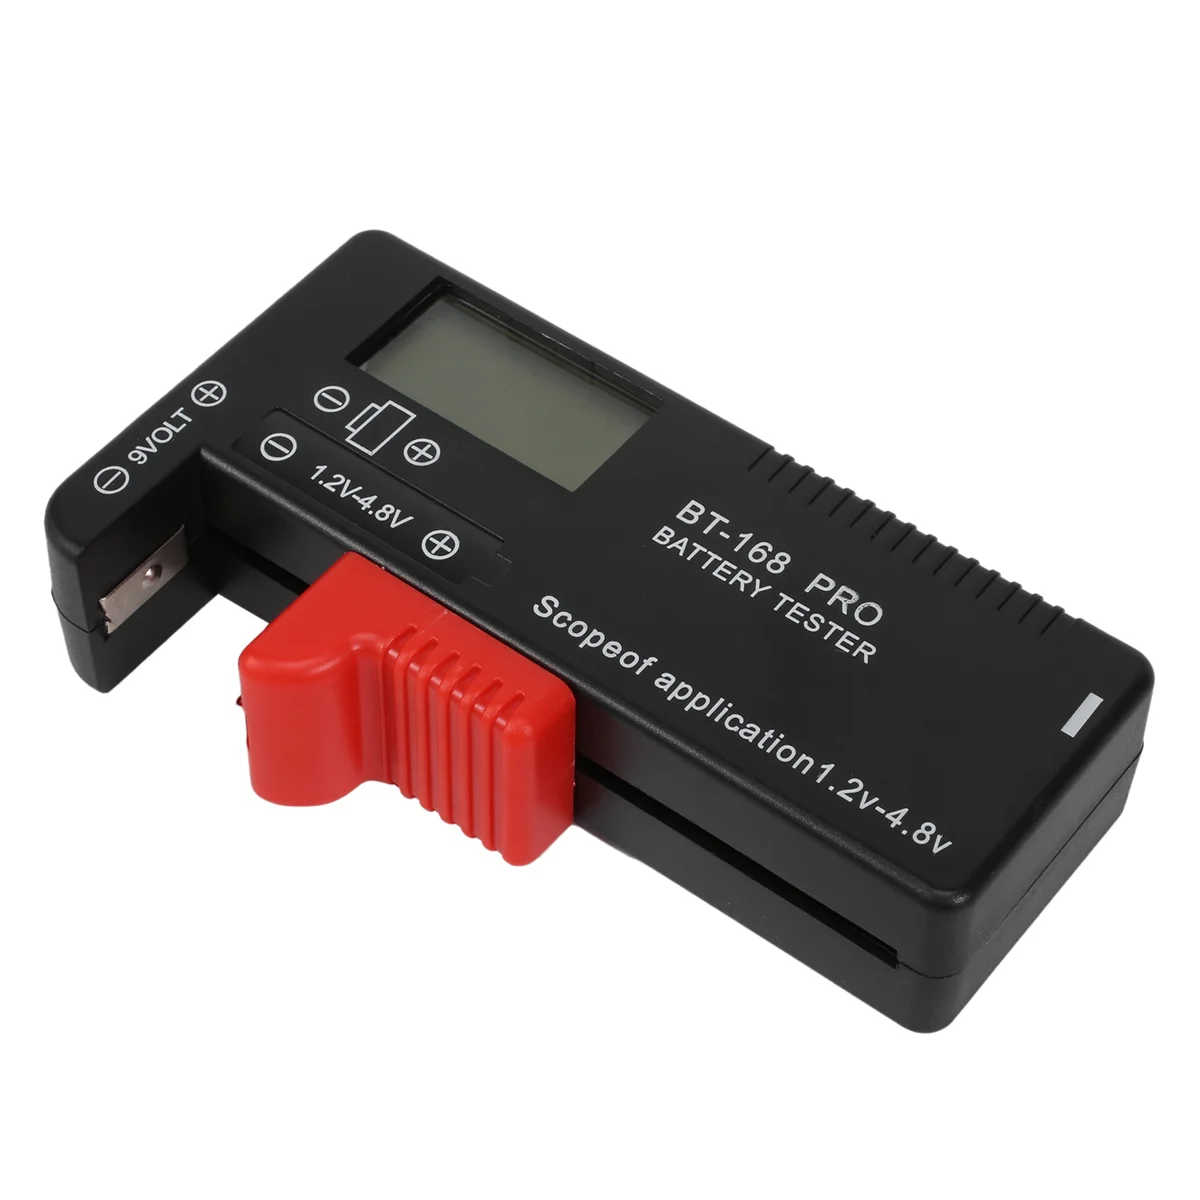 

2 Pieces Digital LCD Universal Battery Tester (Model: BT - 168 PRO), Battery Tester Volt Checker for AA AAA C D 18650 9V